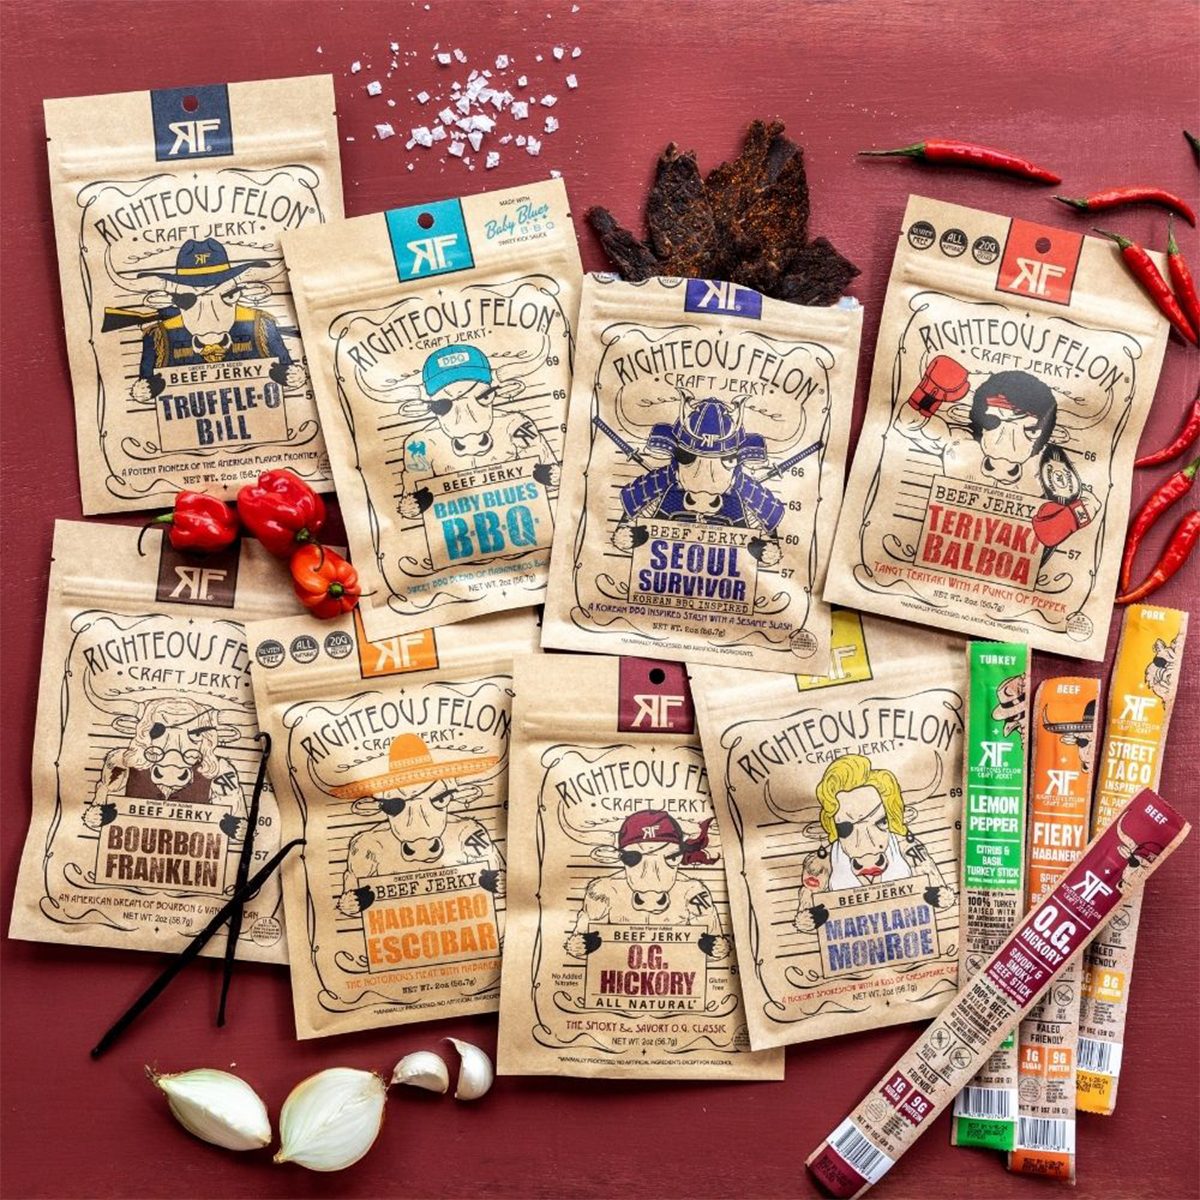 <p>Beef jerky is a high-protein snack that will help keep you feeling full and satisfied between meals. <a href="https://www.righteousfelon.com/collections/giftbundles/products/righteous-sampler-jerky-toobs-12-pack" rel="noopener noreferrer">Righteous Felon's Craft Jerky Sampler Pack</a> comes with 12 different savory and spicy flavorful jerky varieties like Teriyaki Balboa and Maryland Monroe and classic meat stick favorites like OG Hickory. Stay satiated with the jerky's all-natural ingredients and no added preservatives.</p> <p class="listicle-page__cta-button-shop"><a class="shop-btn" href="https://www.righteousfelon.com/collections/giftbundles/products/righteous-sampler-jerky-toobs-12-pack">Shop Now</a></p>